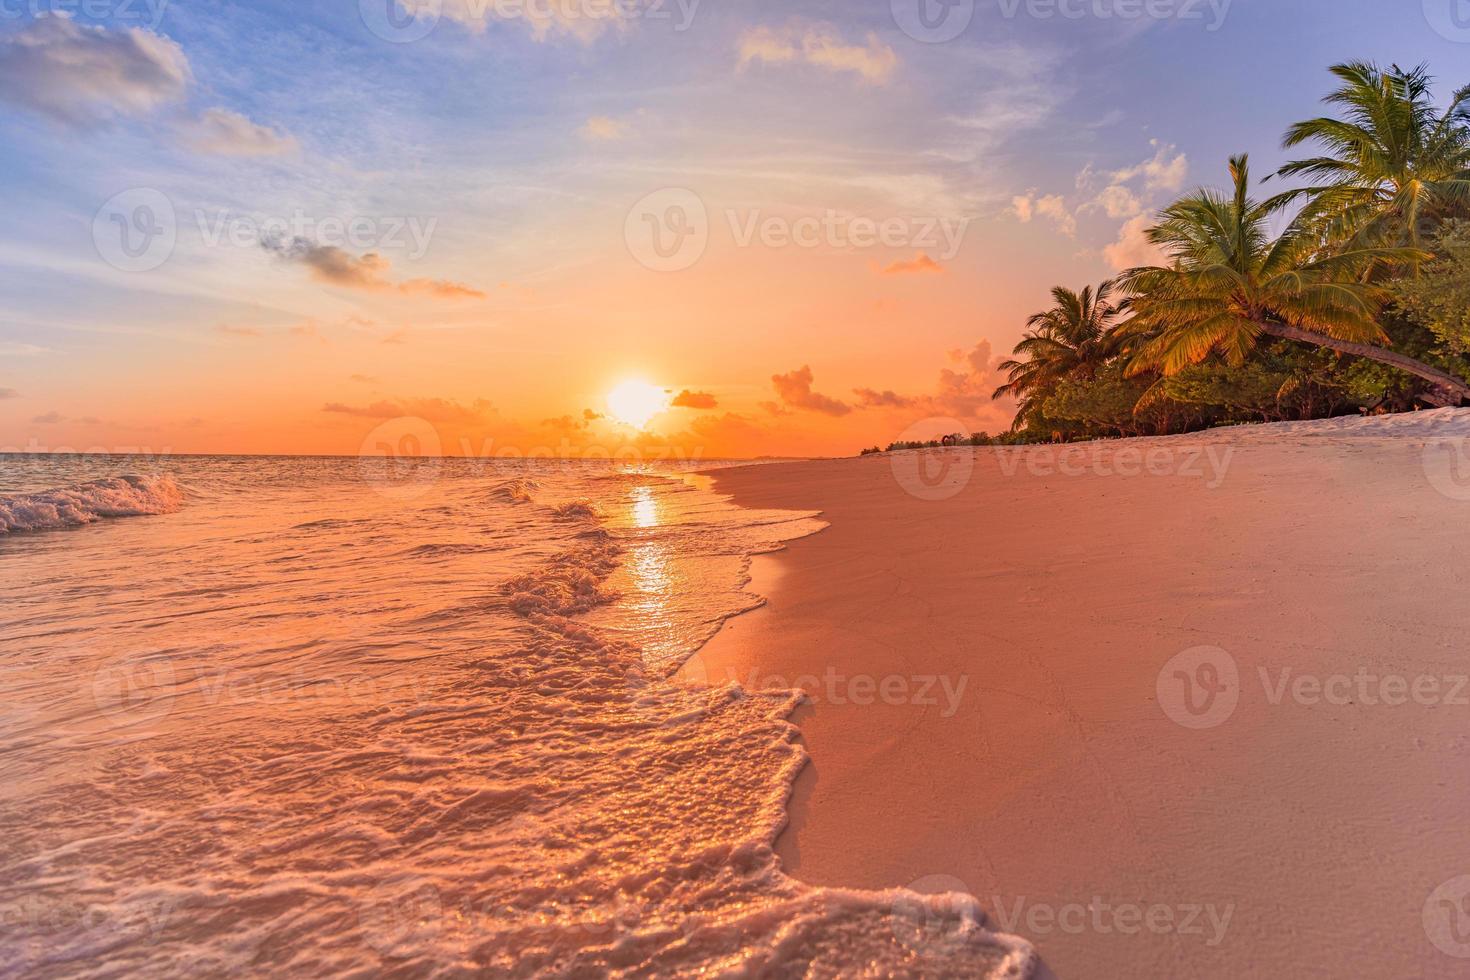 Fantastic closeup view of calm sea water waves with orange sunrise sunset sunlight. Tropical island beach landscape, exotic shore coast. Summer vacation, holiday amazing nature scenic. Relax paradise photo